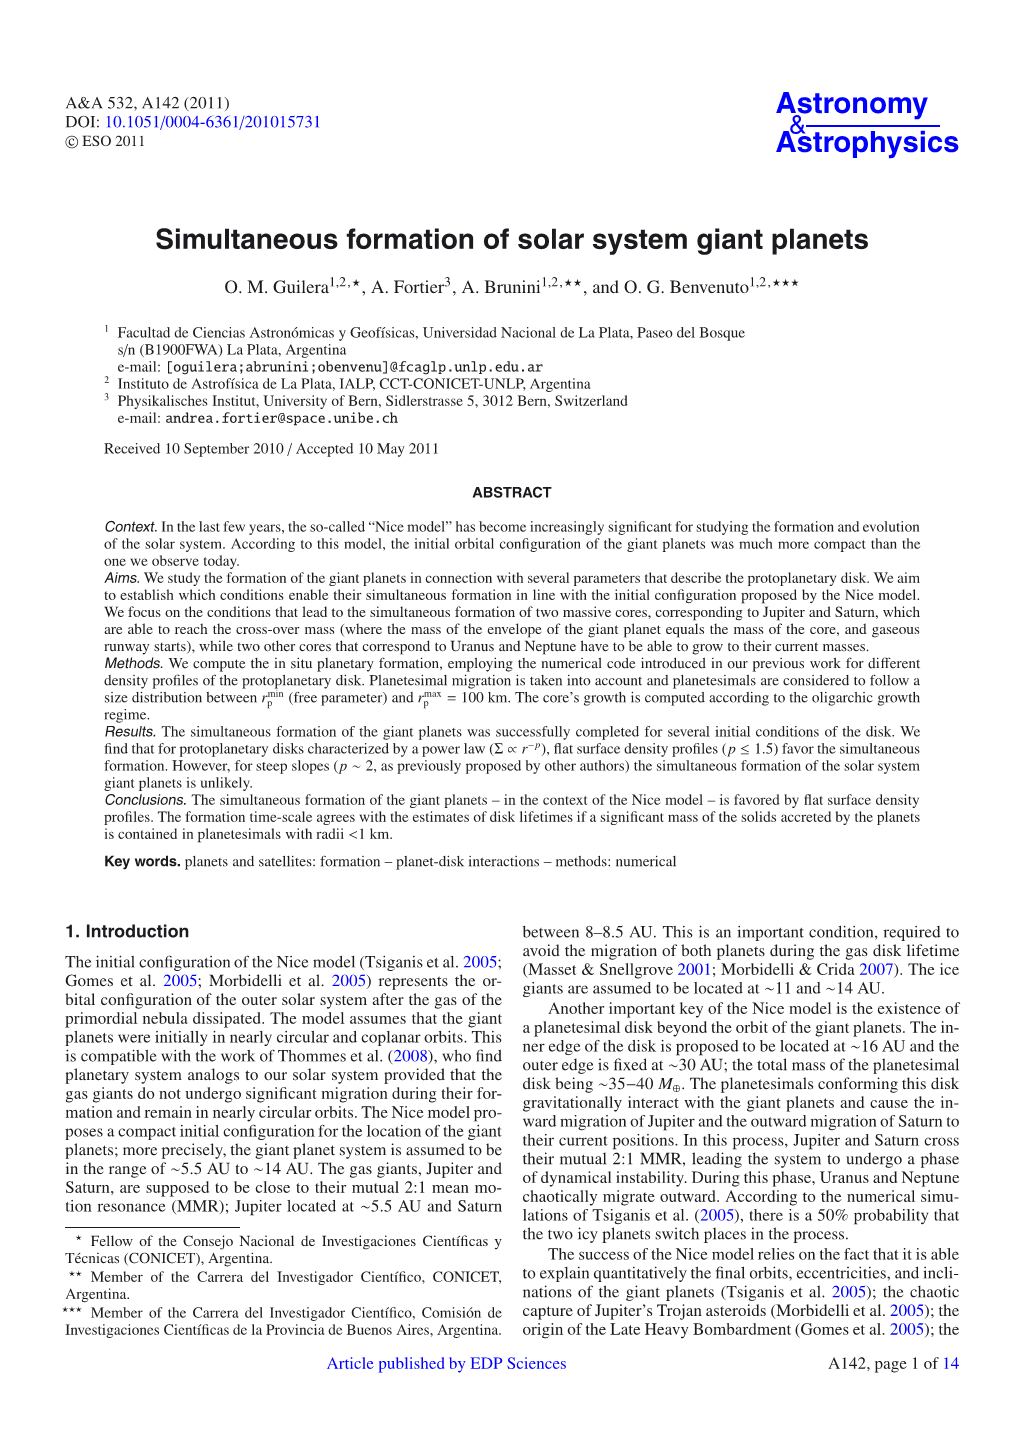 Simultaneous Formation of Solar System Giant Planets